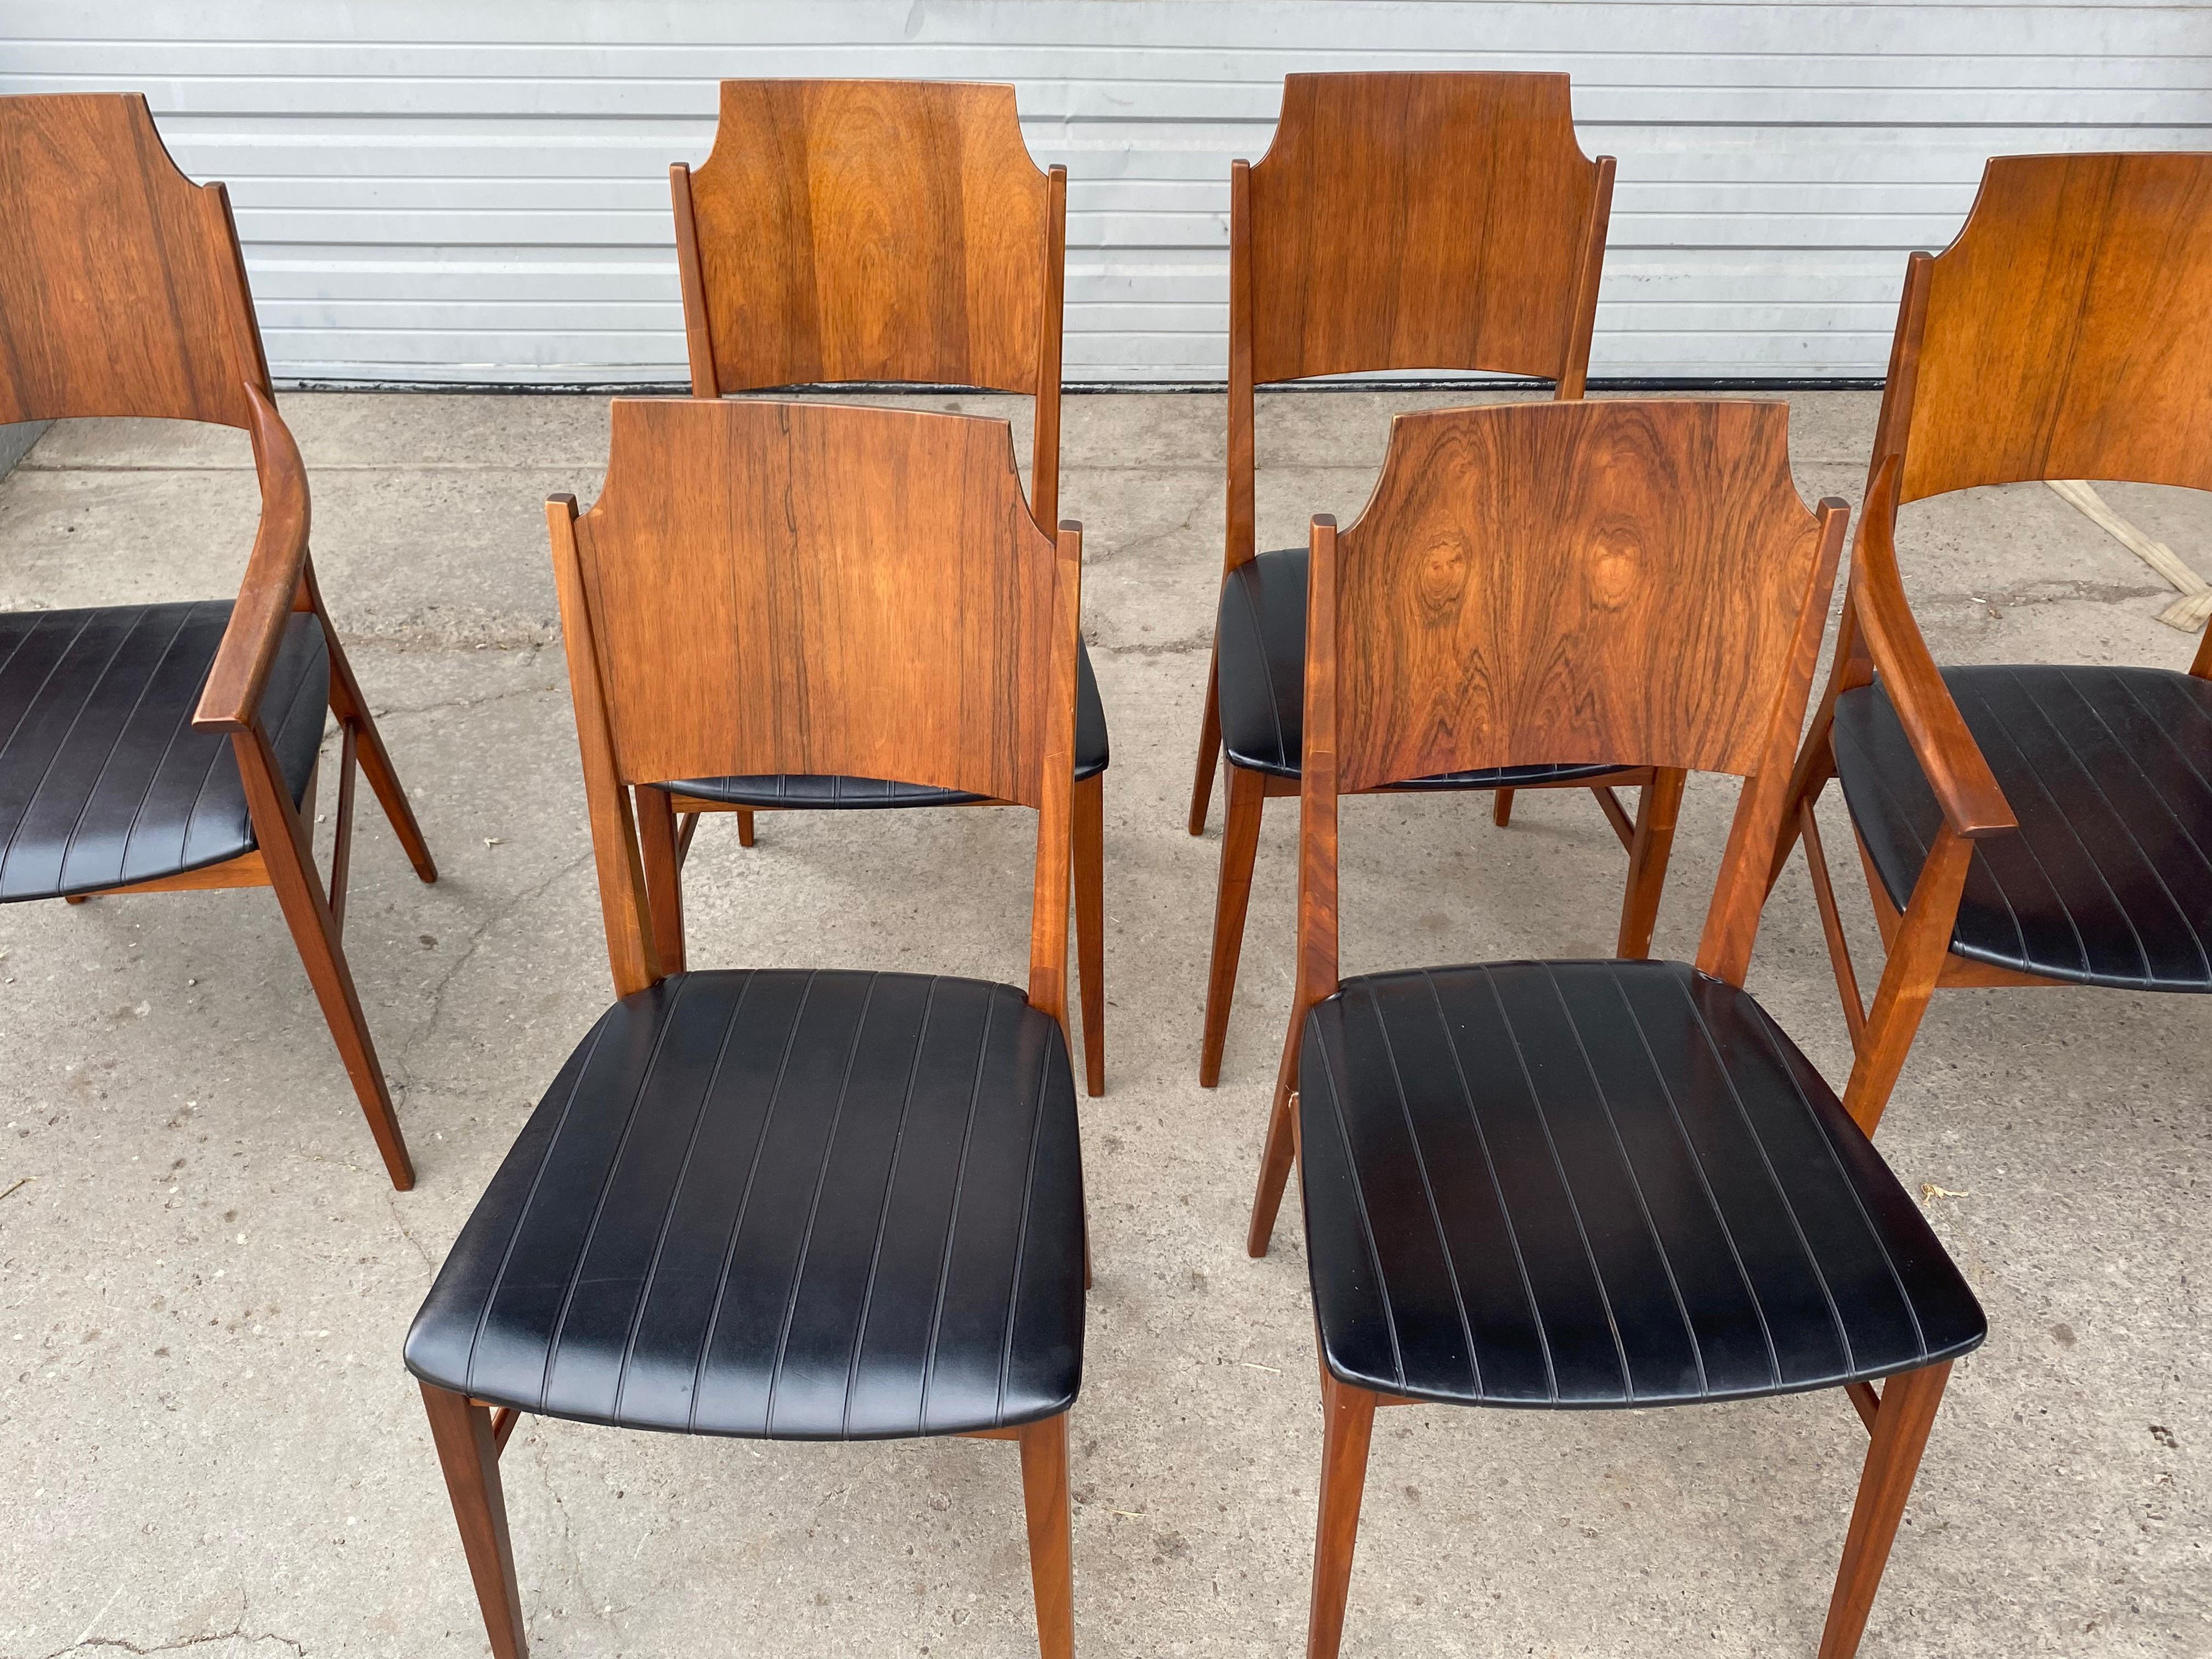 Set 6 Rosewood Dining Chairs, Paul McCobb, Delineator In Good Condition For Sale In Buffalo, NY